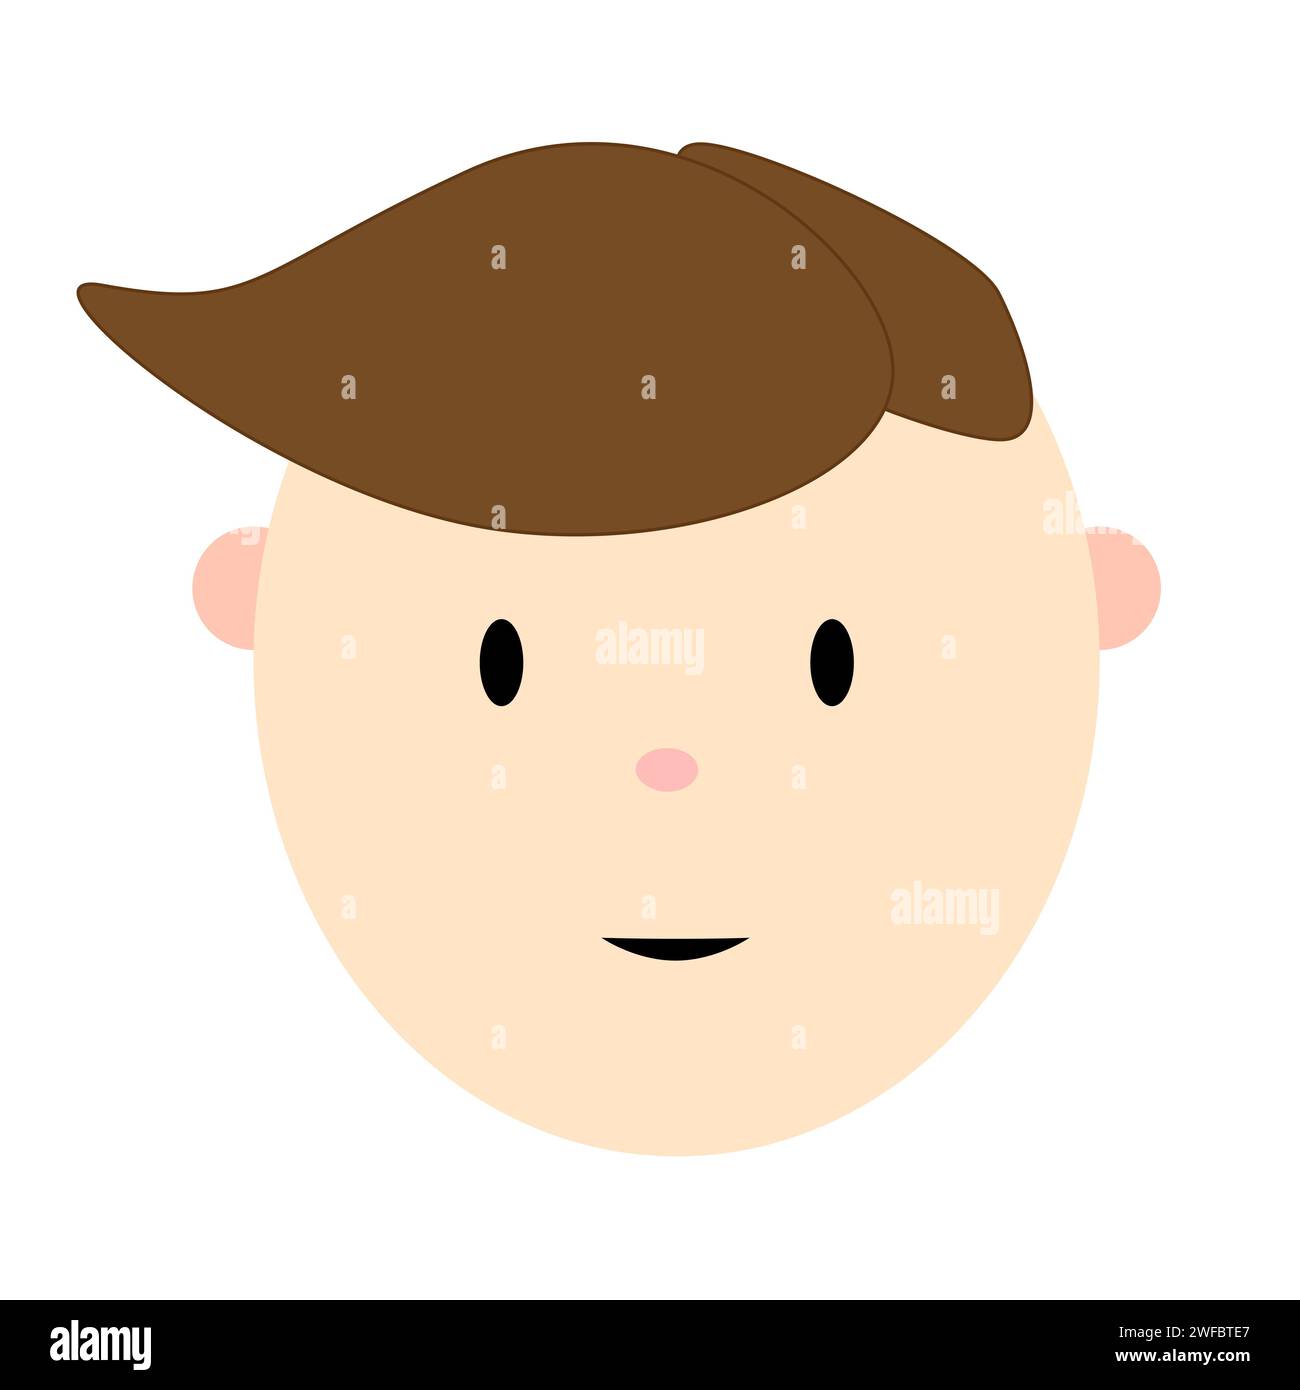 Little boy face icon. Cartoon style. Character design. Message element. Simple flat art. Vector illustration. Stock image. EPS 10. Stock Vector